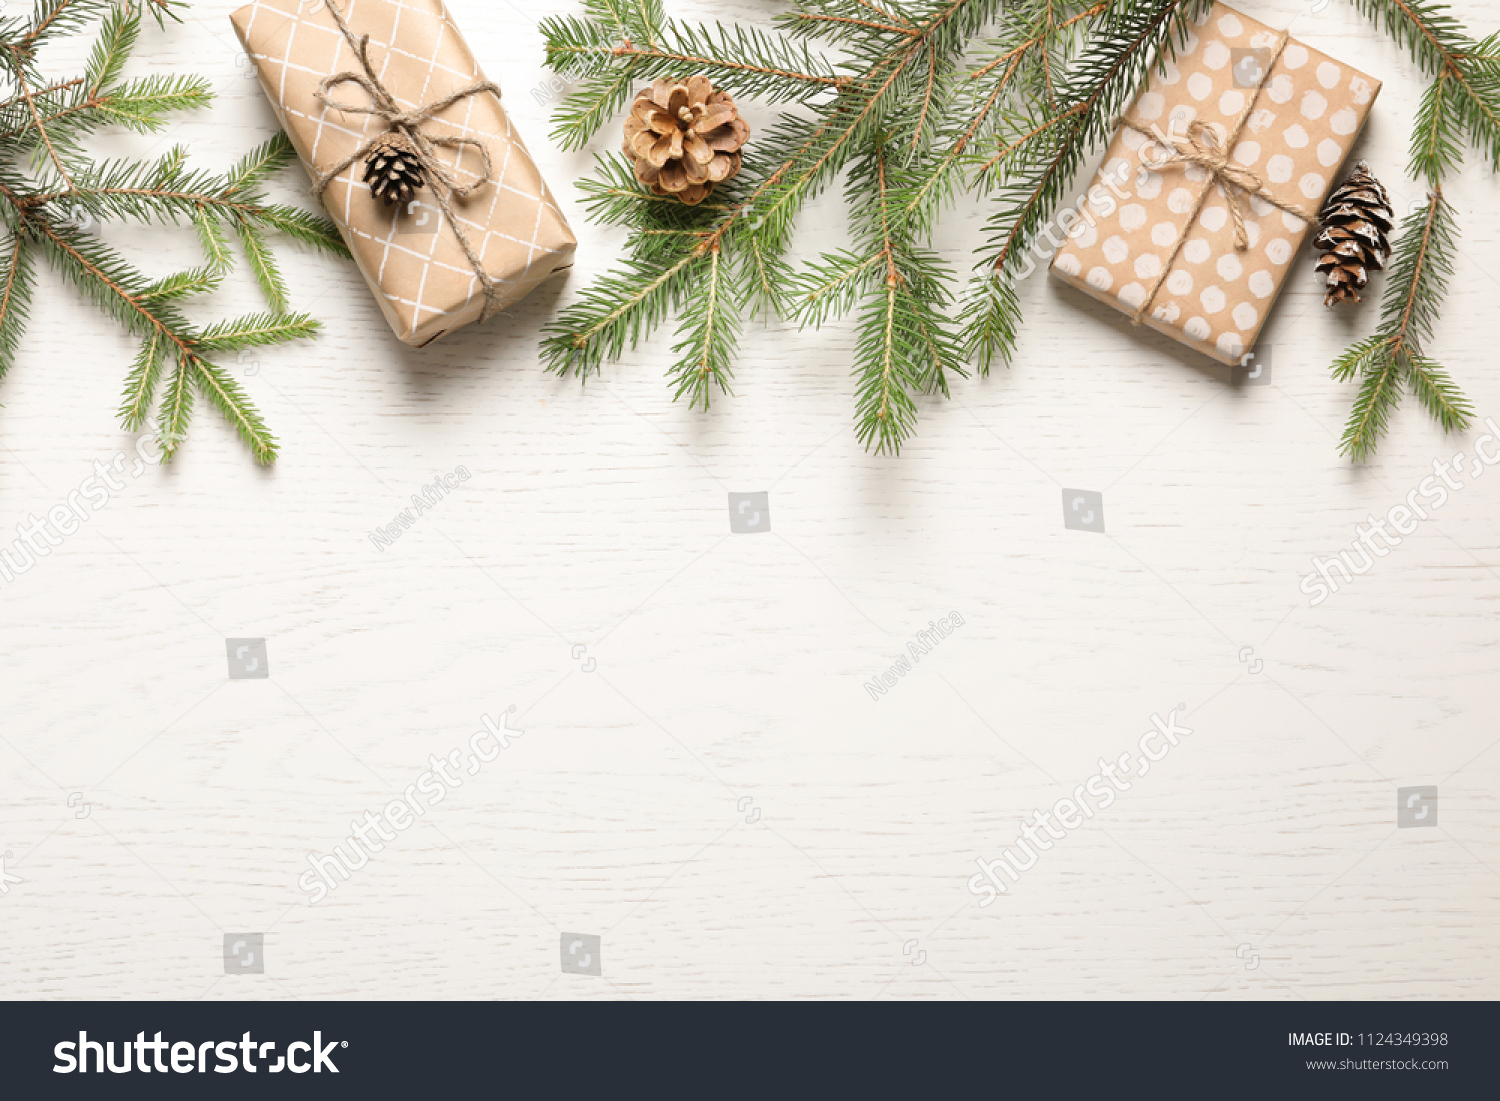 Flat lay composition with Christmas gifts and fir branches on light background #1124349398